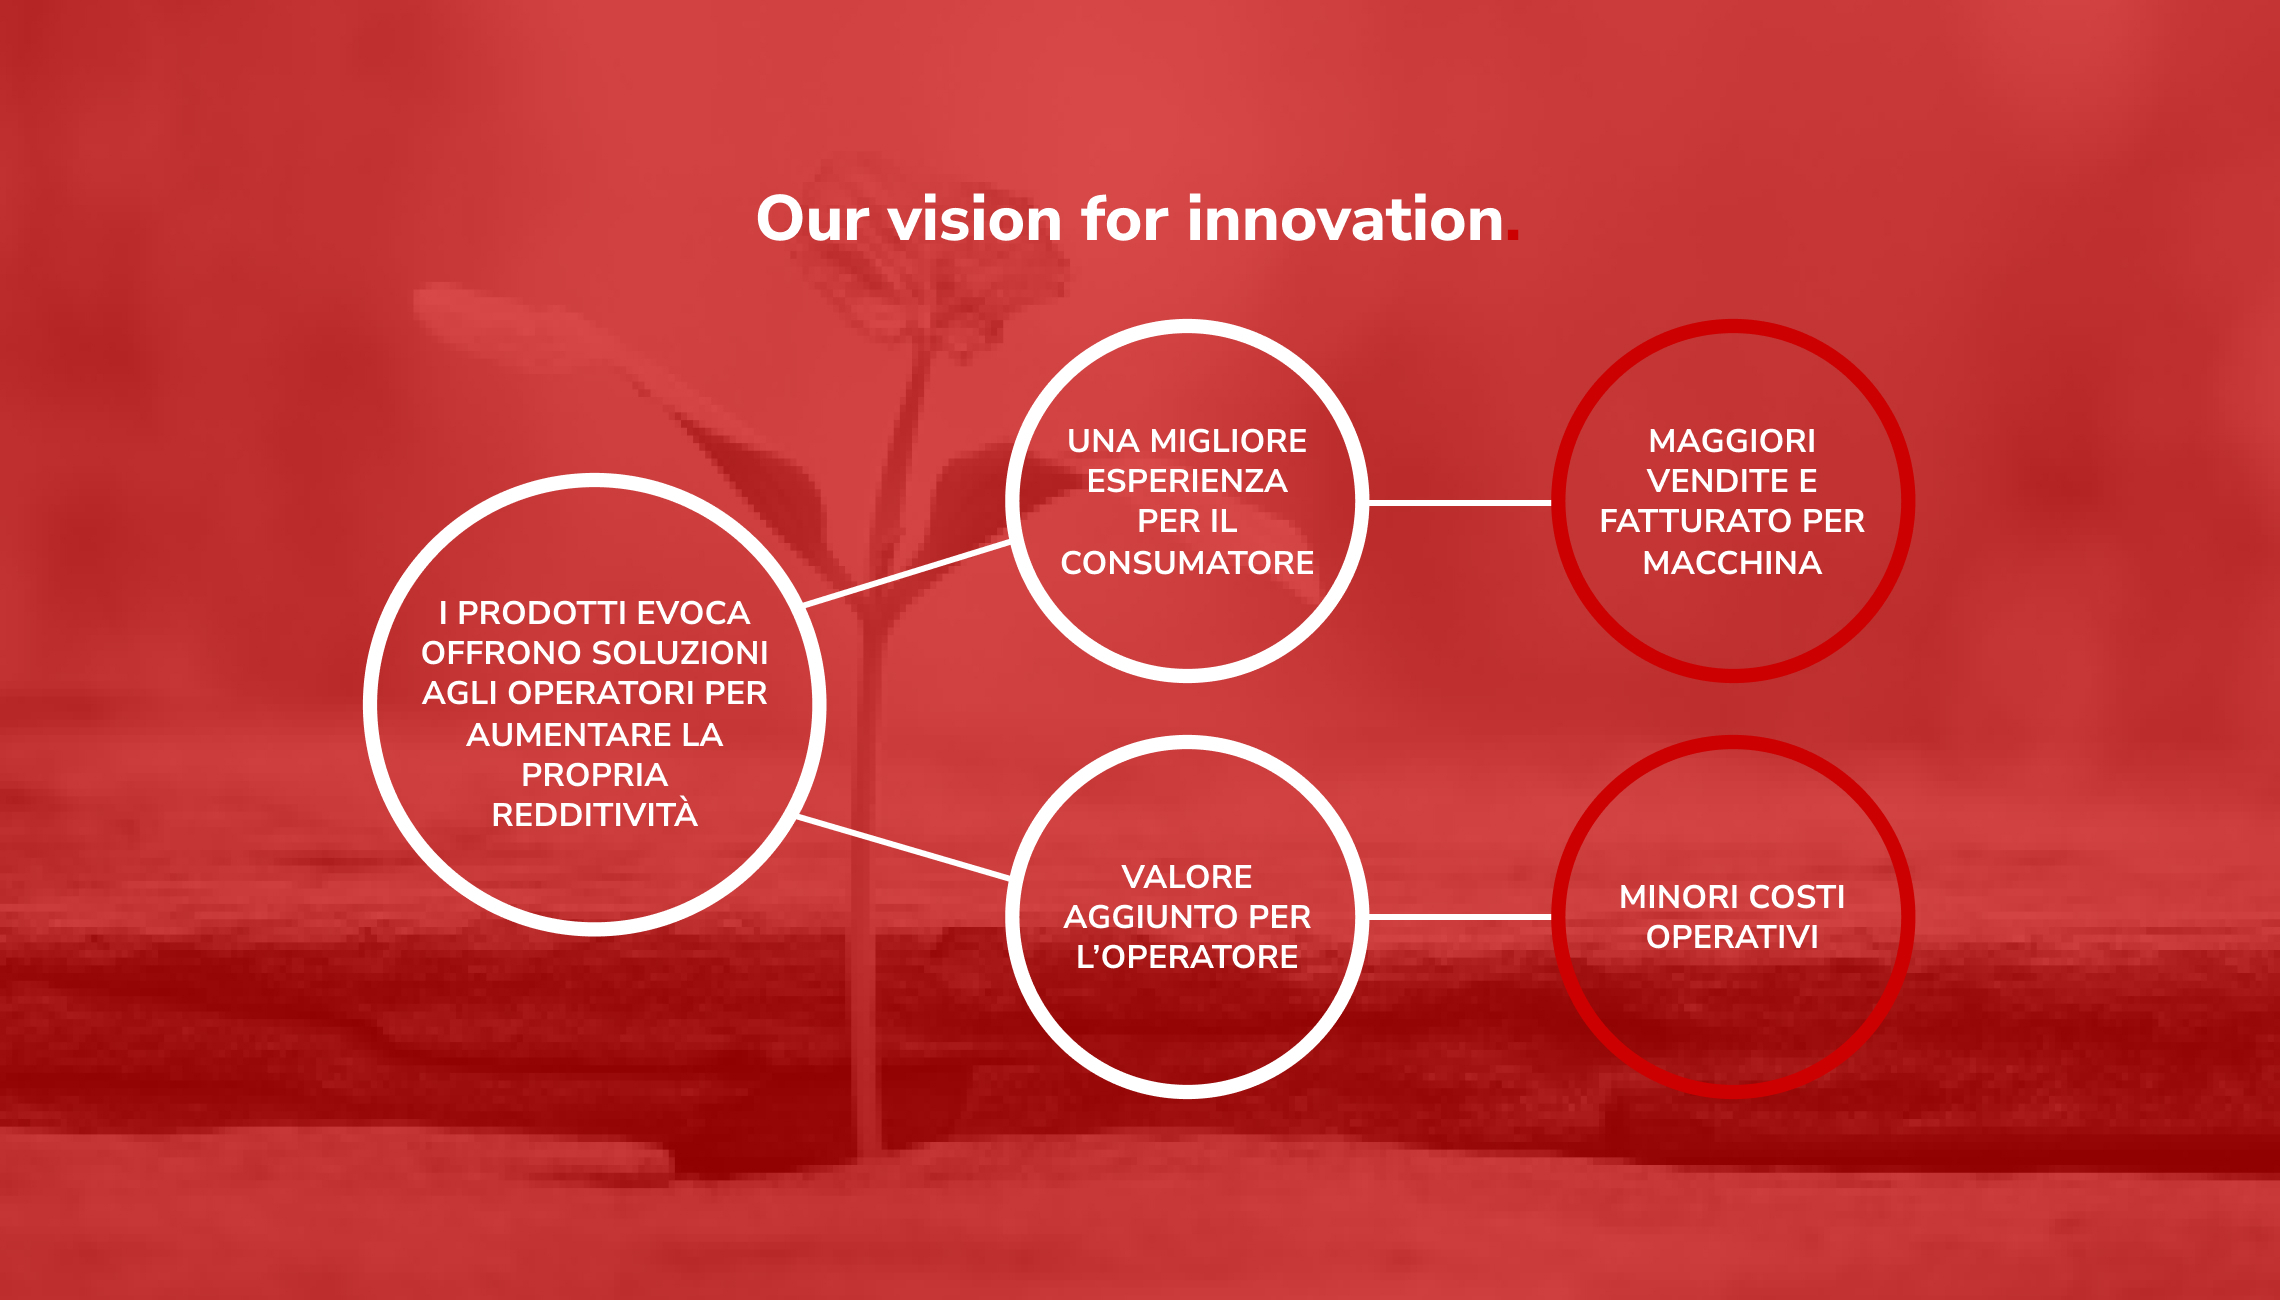 Our vision for innovation